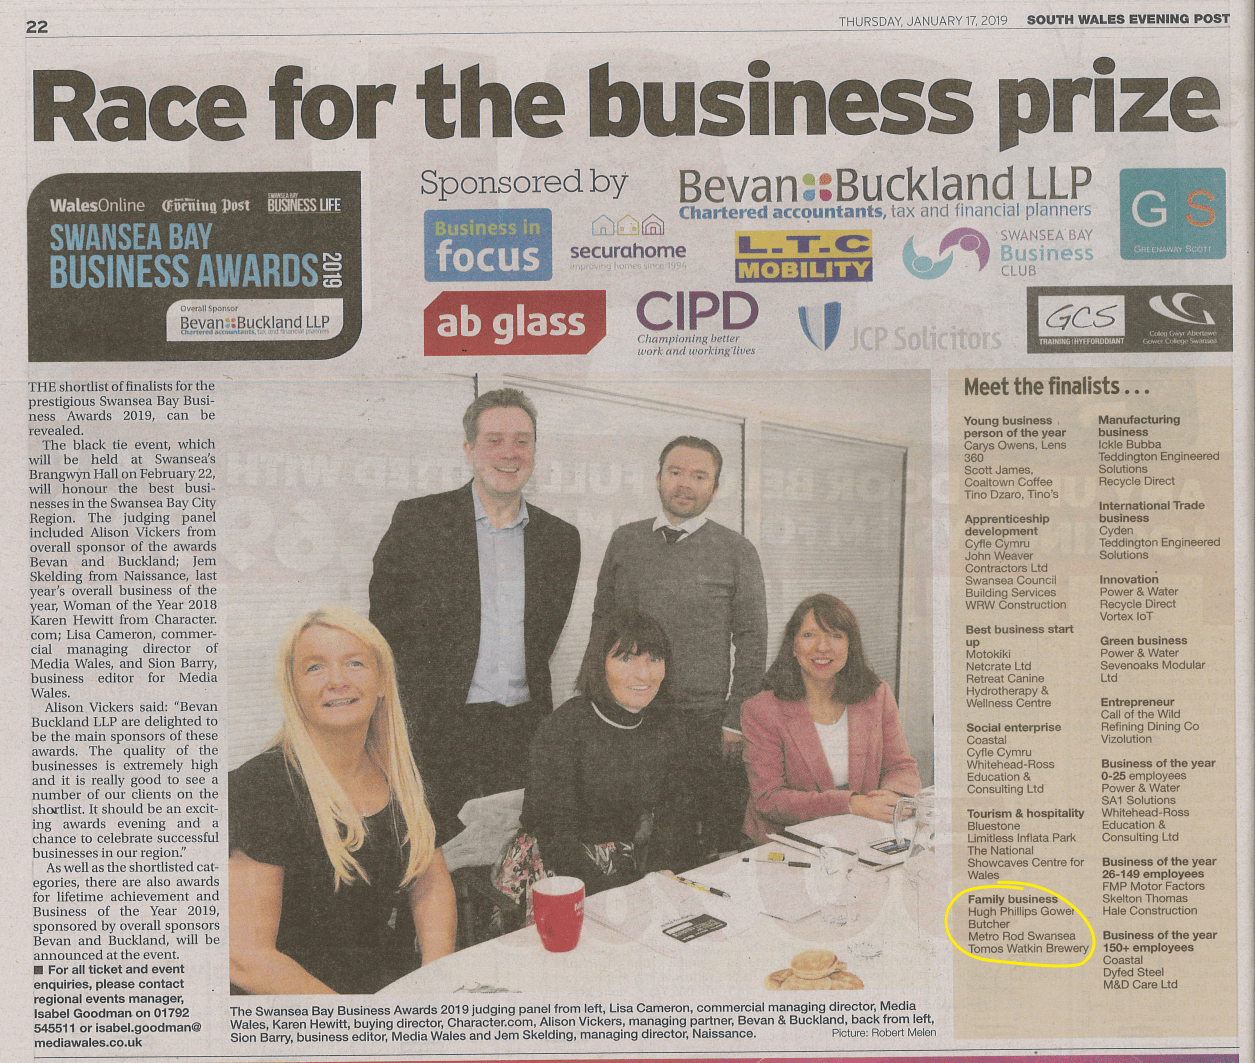 WE’RE IN THE NEWS… PAPER! METRO ROD SWANSEA BUSINESS AWARDS